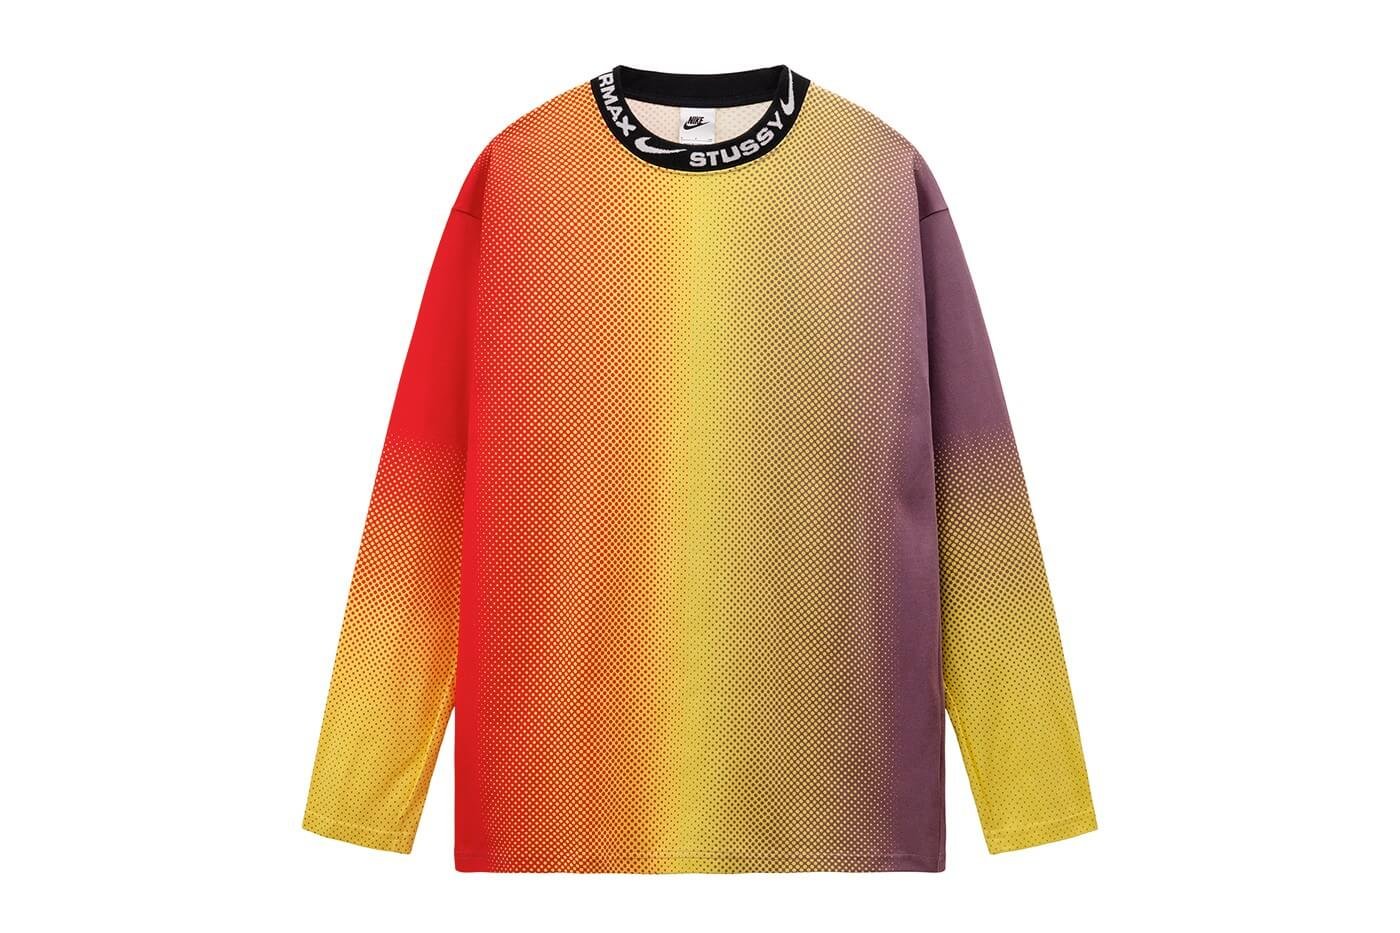 CNK-nike-stussy-apparel-collection-gradient-long-sleeve.jpeg